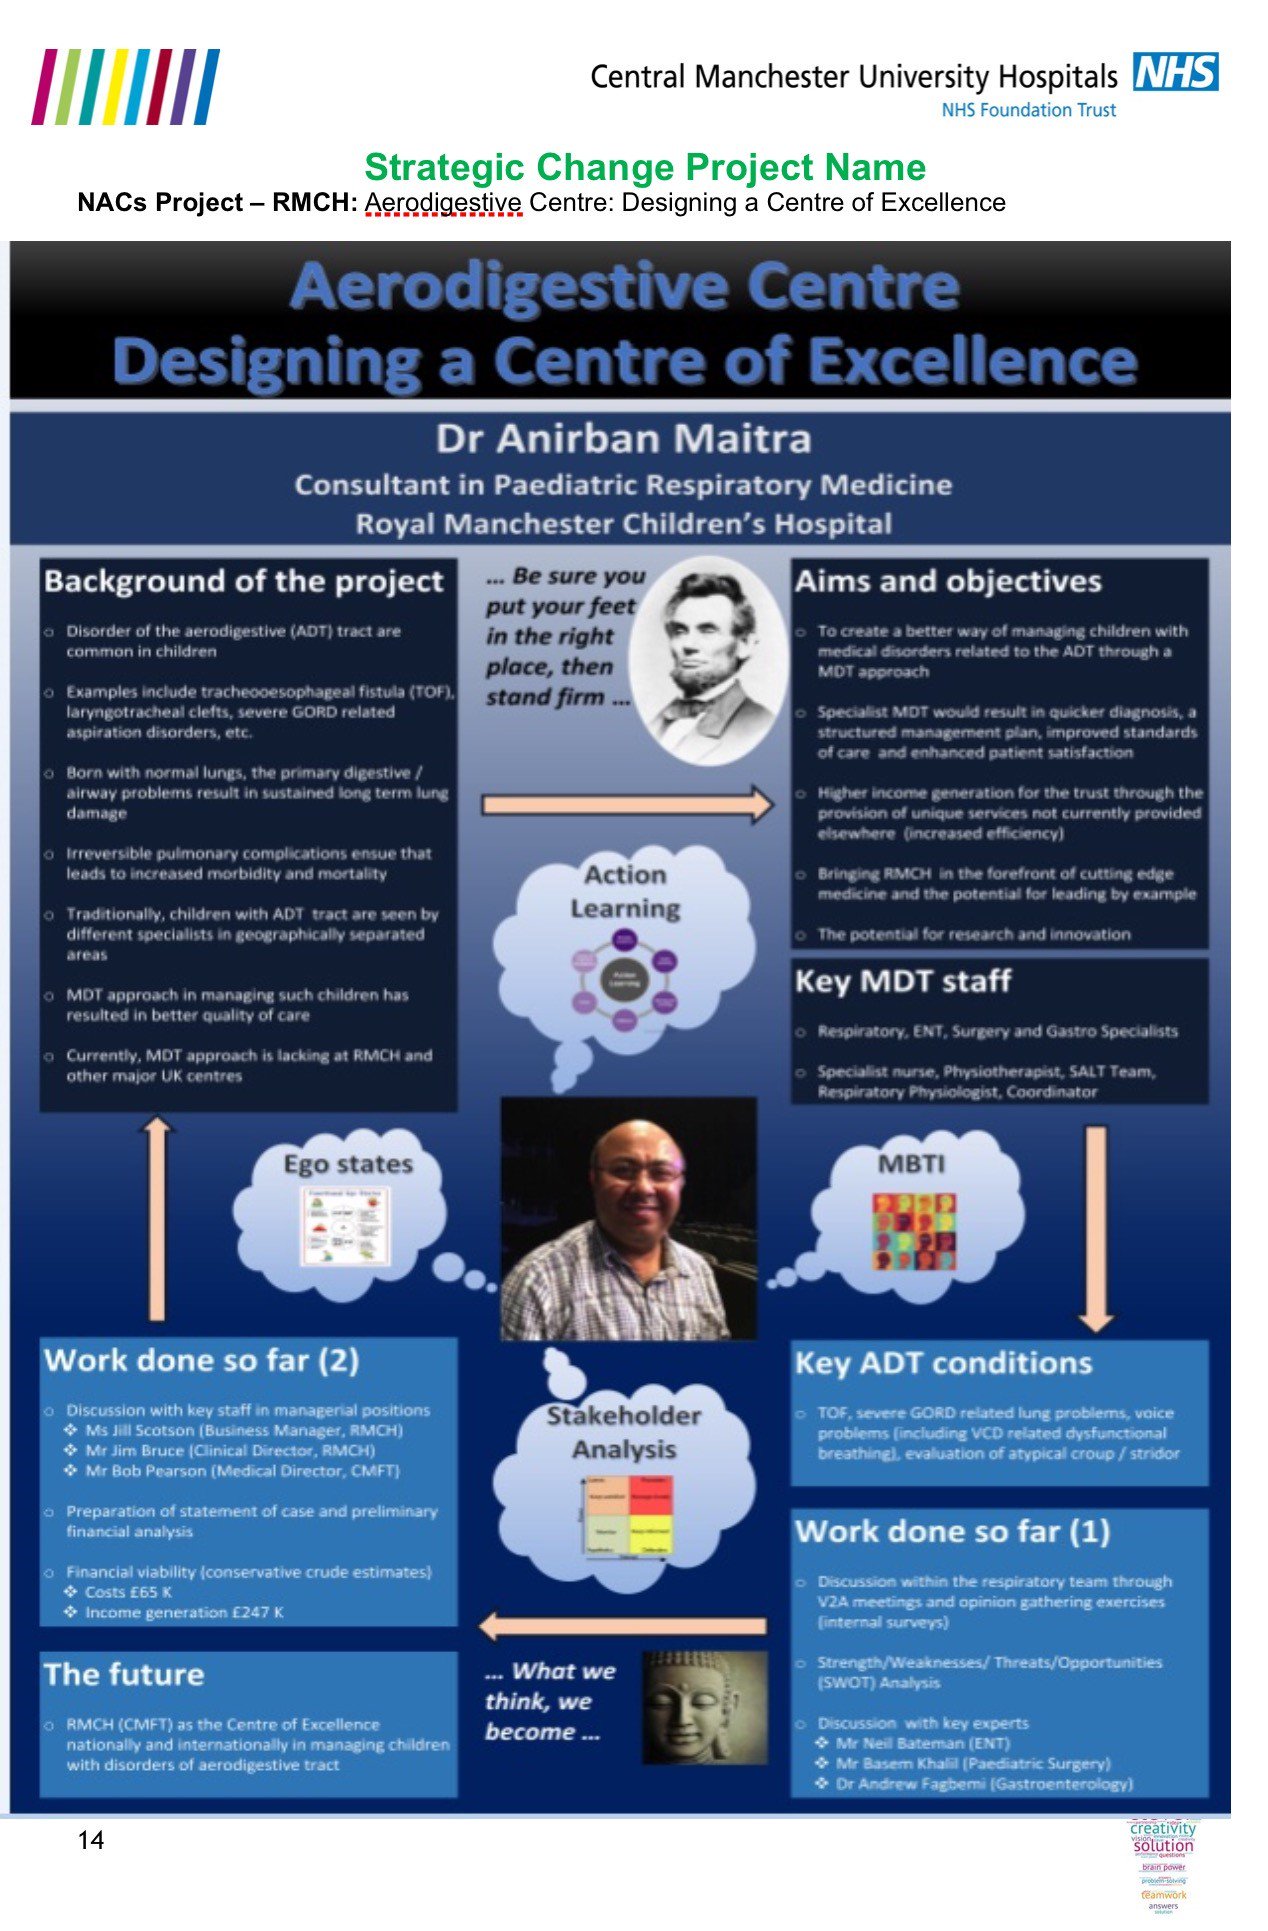 Aerodigestive Centre Designing a Centre of Excellence featured image